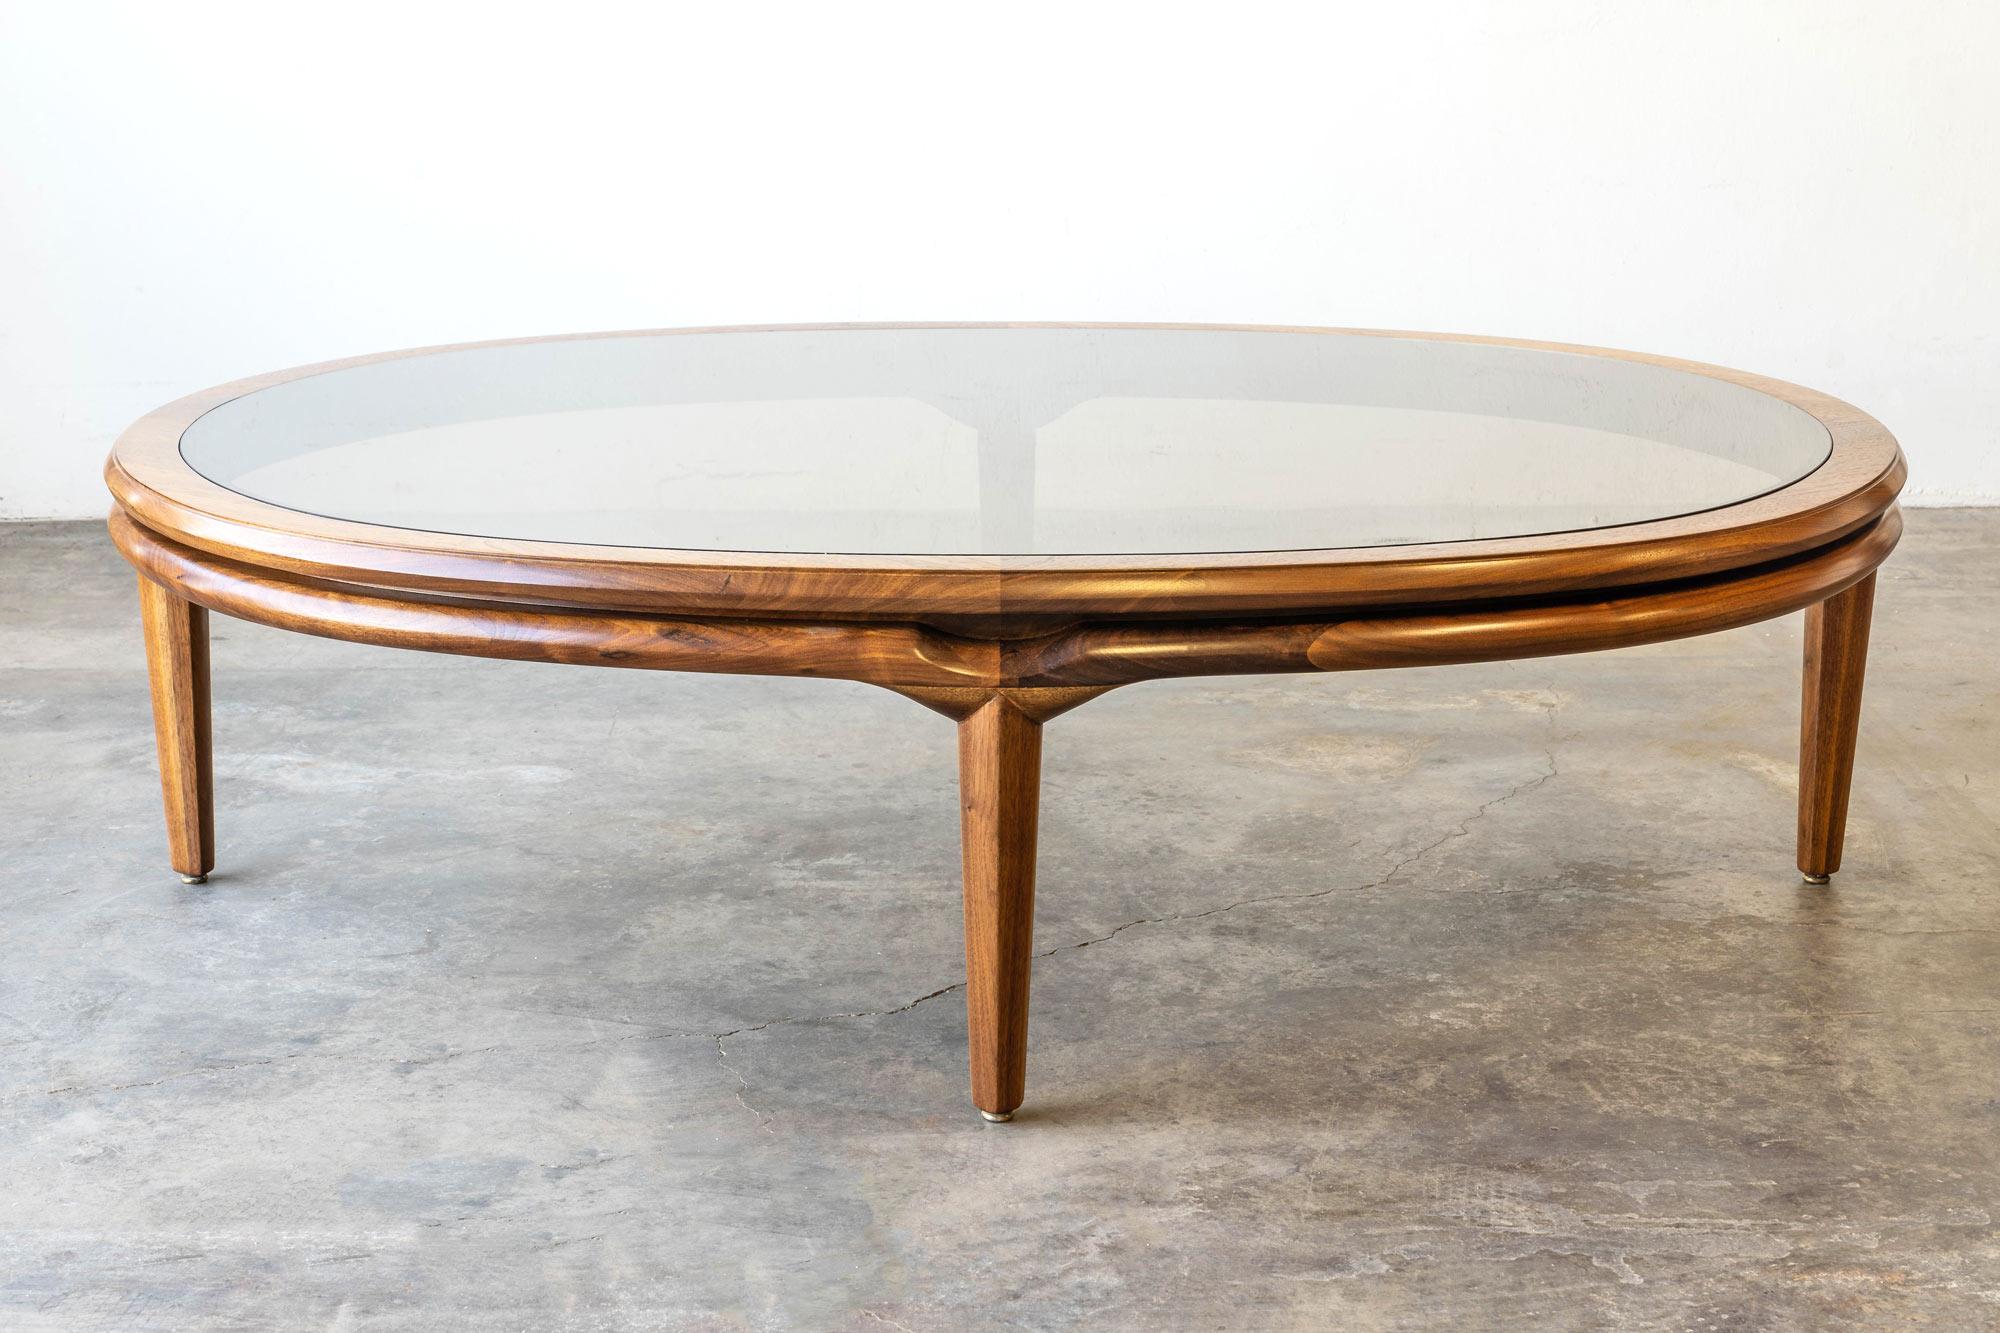 American Mid-Century Modern Monteverdi Young Smoked Glass Walnut Coffee Table For Sale